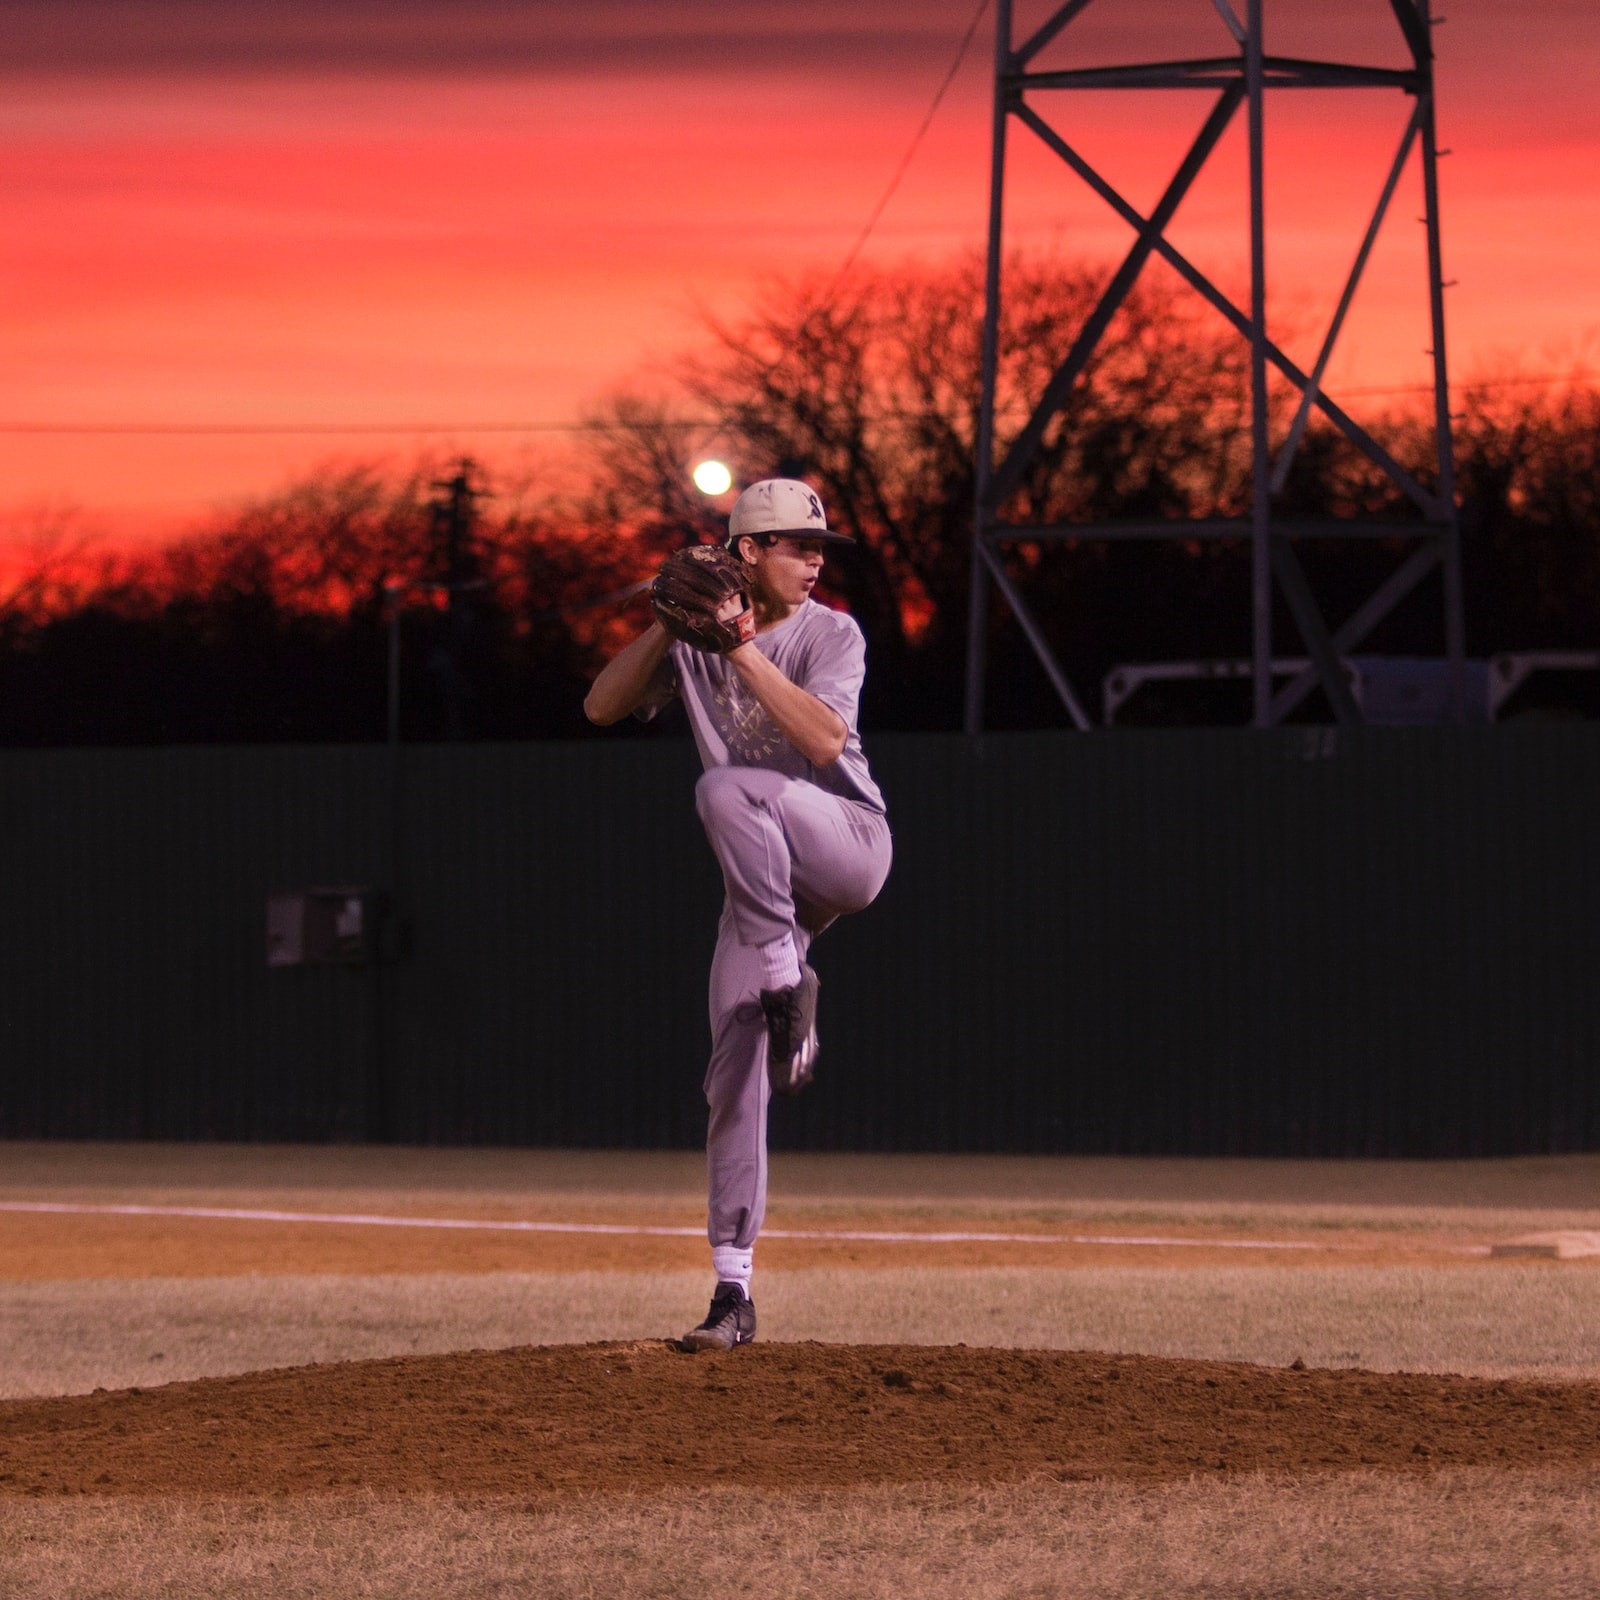 Curveball pitch photo by Chris Moore Unsplash